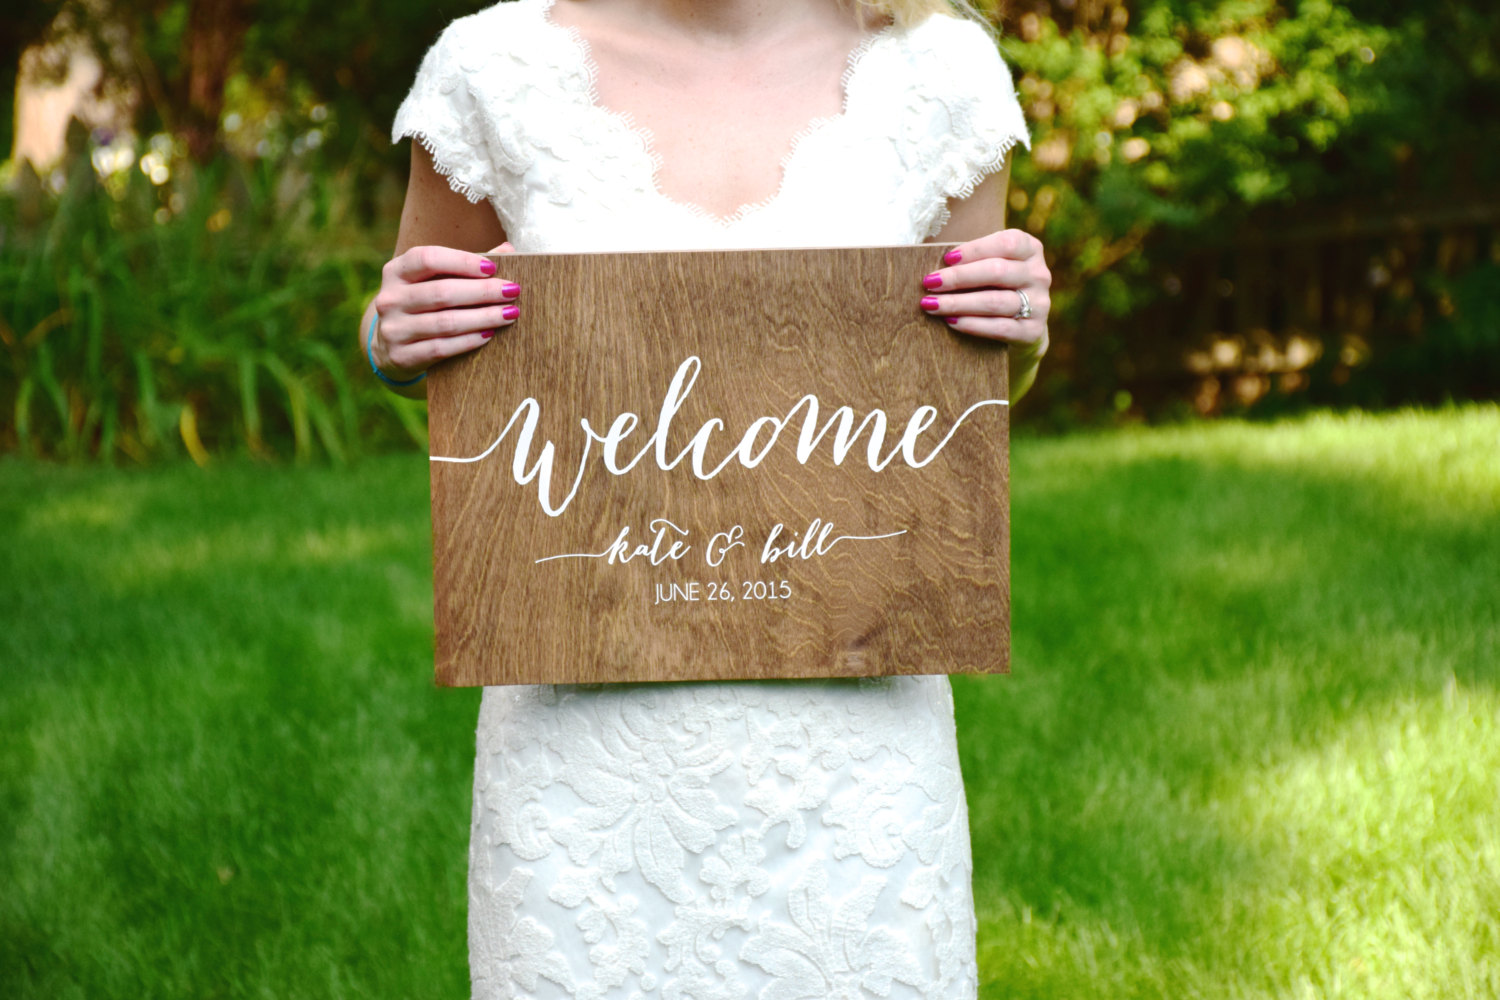 welcome kate and bill sign | signs entrance weddings | https://emmalinebride.com/decor/signs-entrance-weddings/